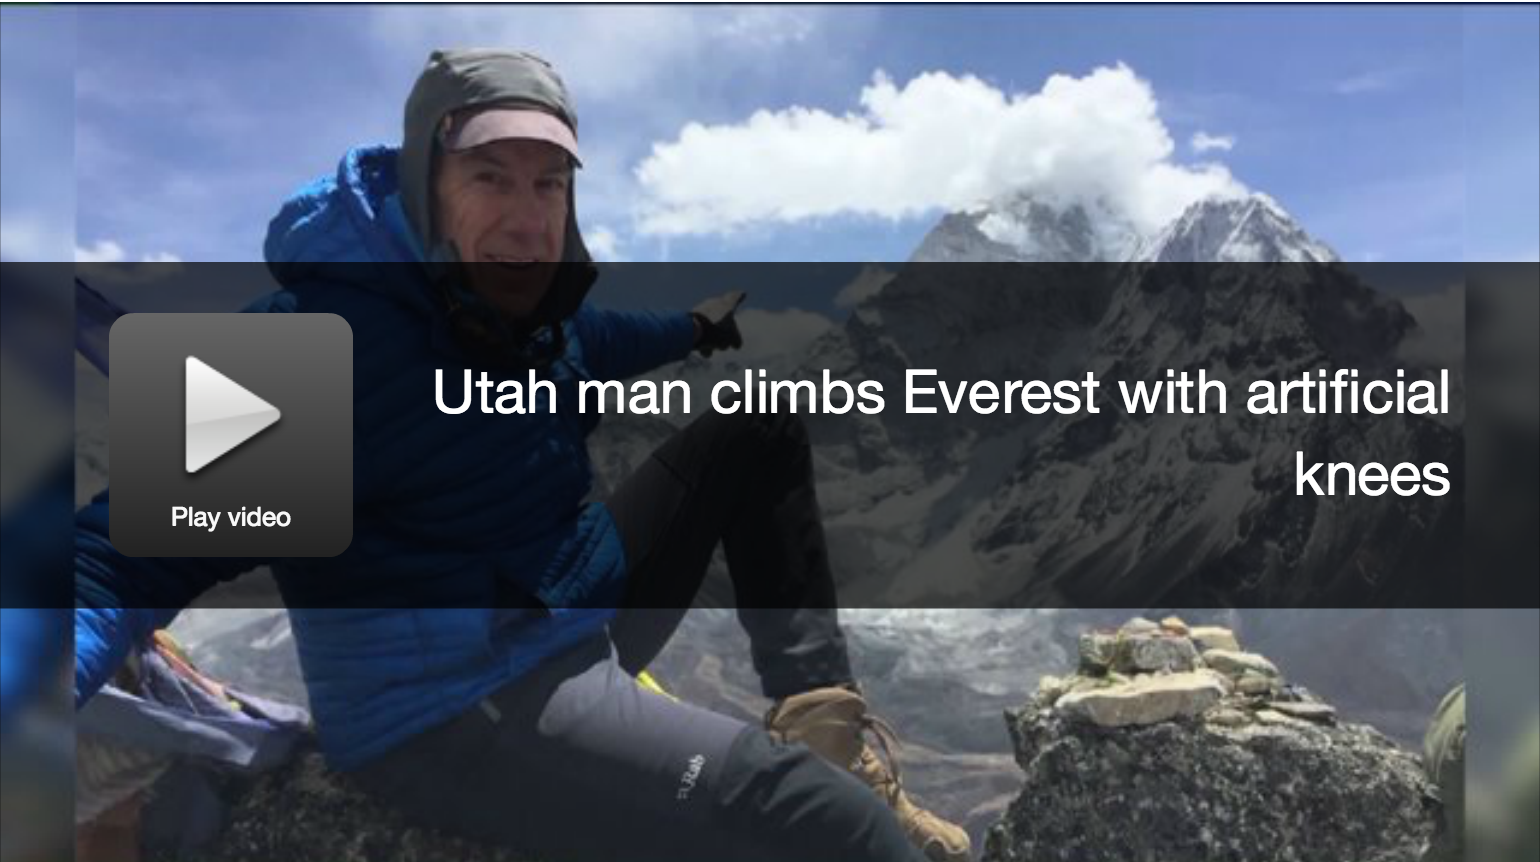 Via Fox13 News: Utahn believed to be first to summit Everest with artificial knees Image